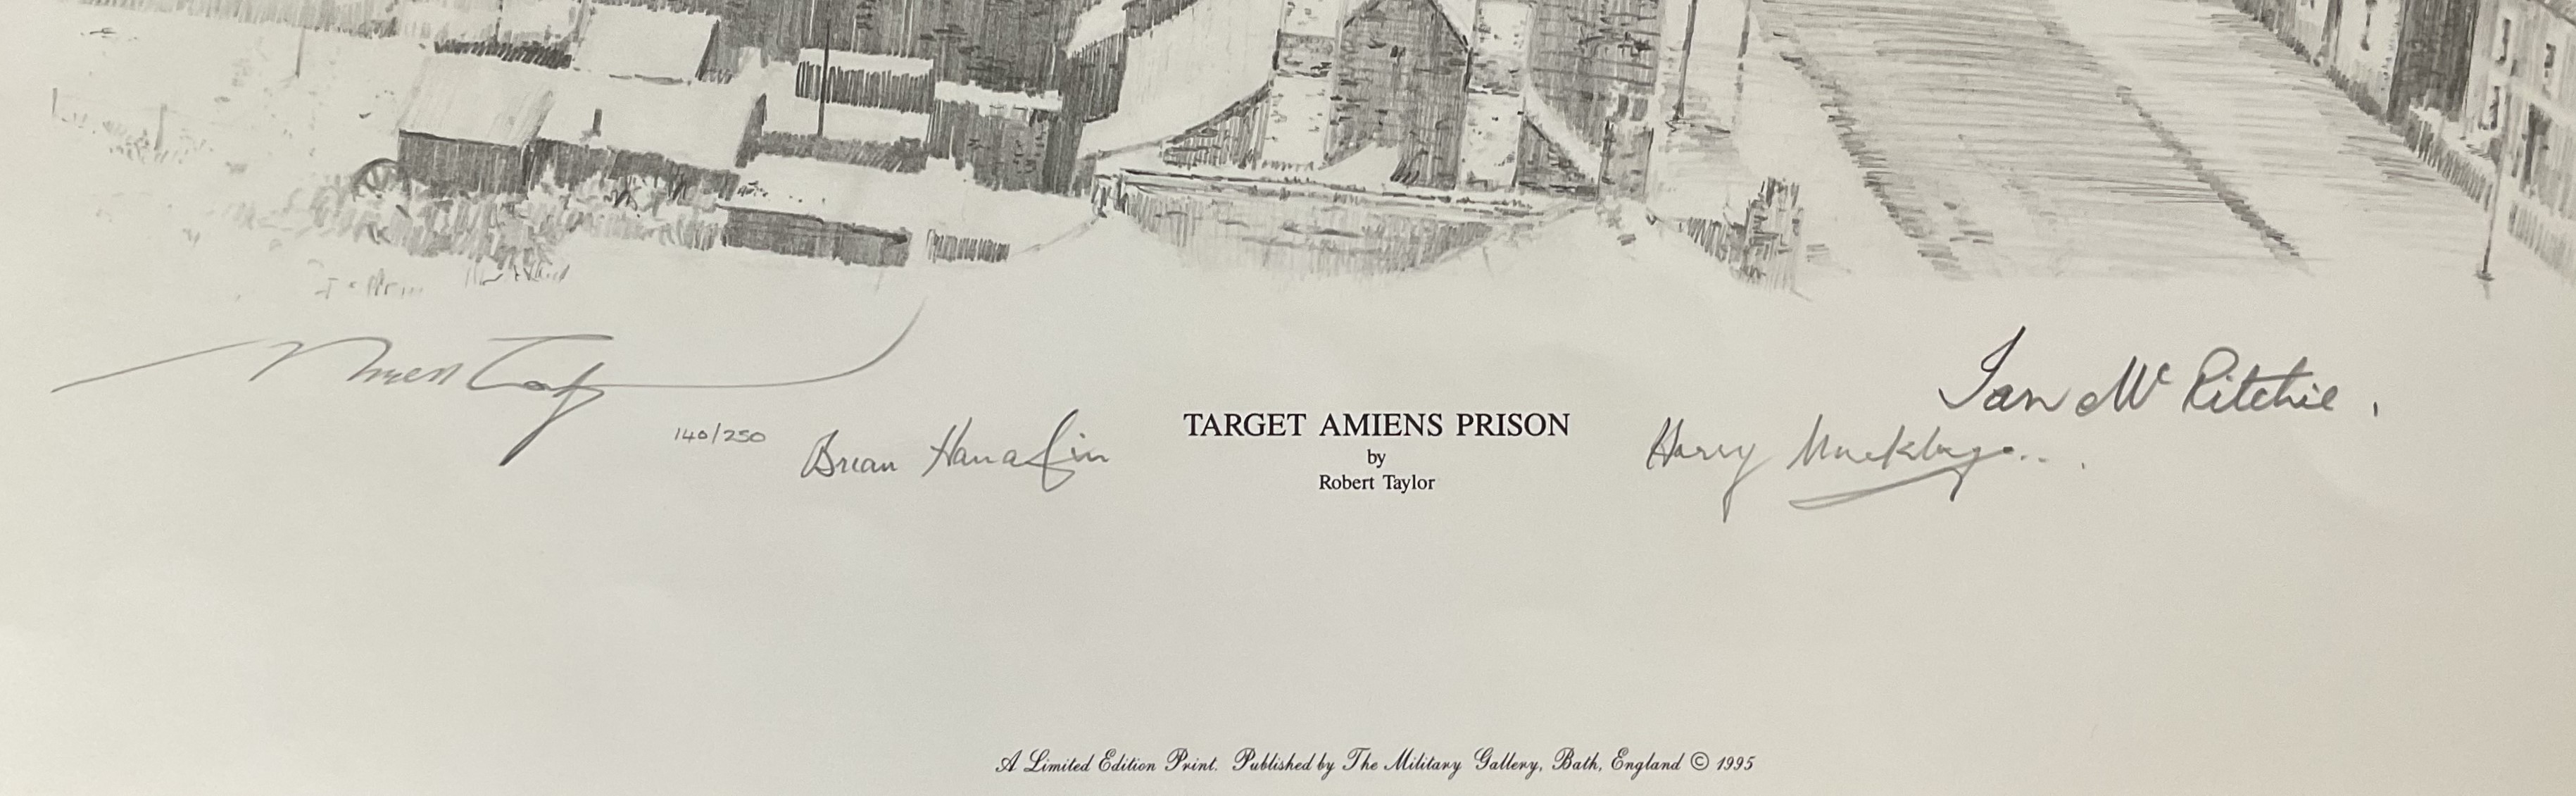 Target Amiens Prison by Robert Taylor Black and White Print signed by the Artist plus Squadron - Image 2 of 2